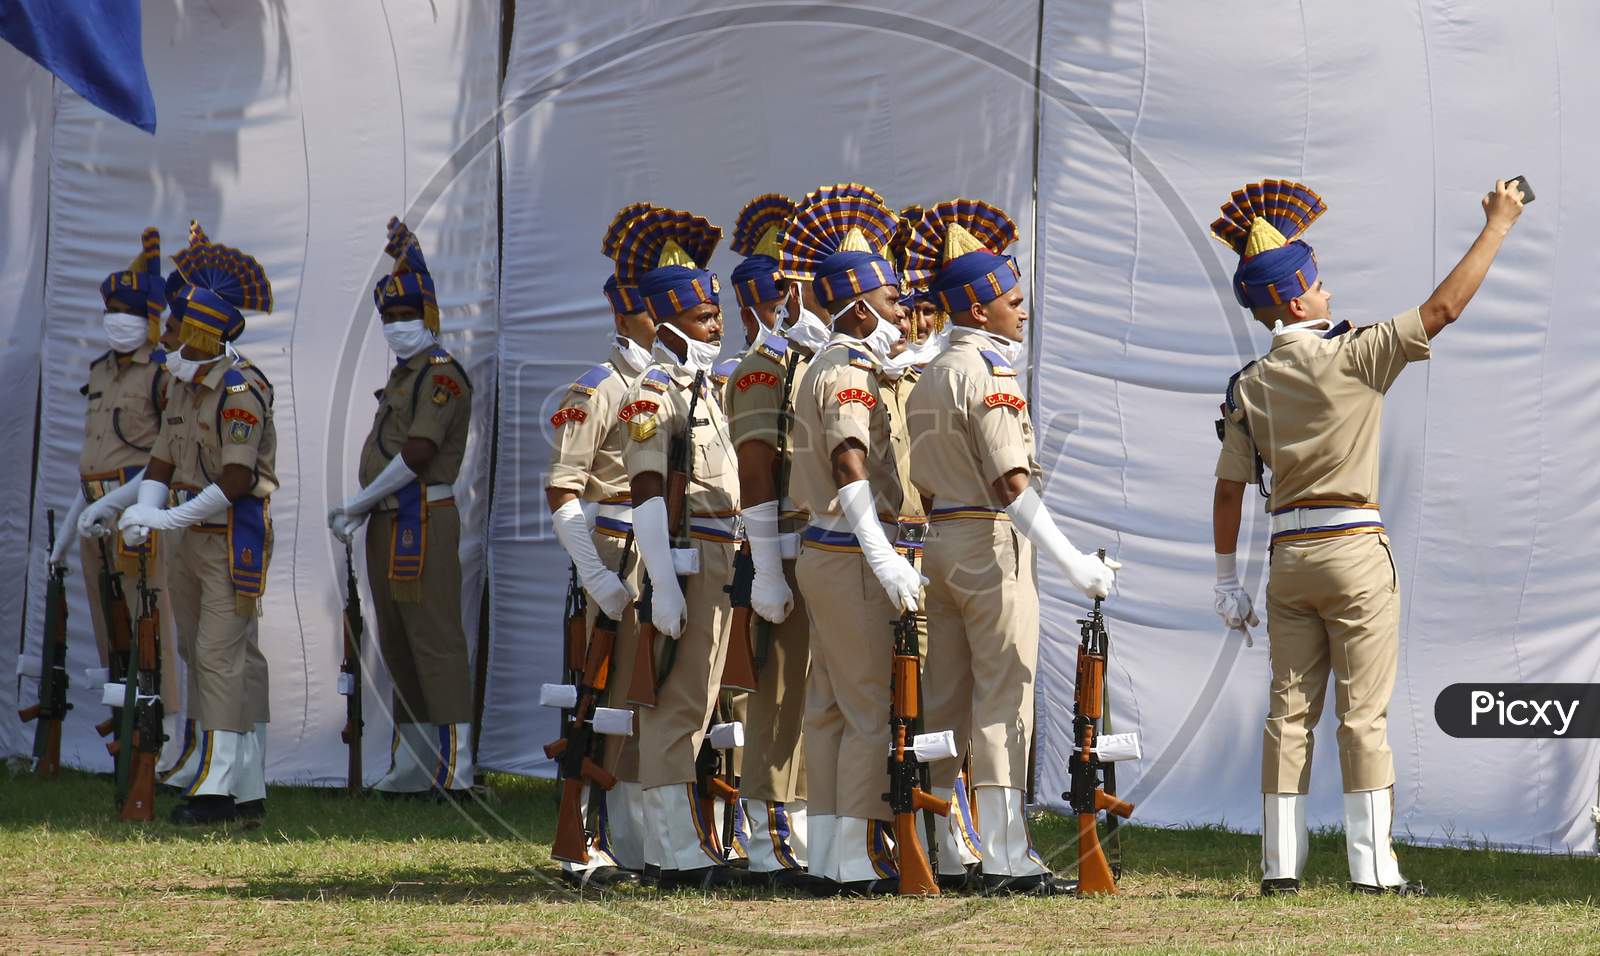 Policemen click a selfie after taking part in India's 74th Independence Day celebrations In Chandigarh August 15, 2020